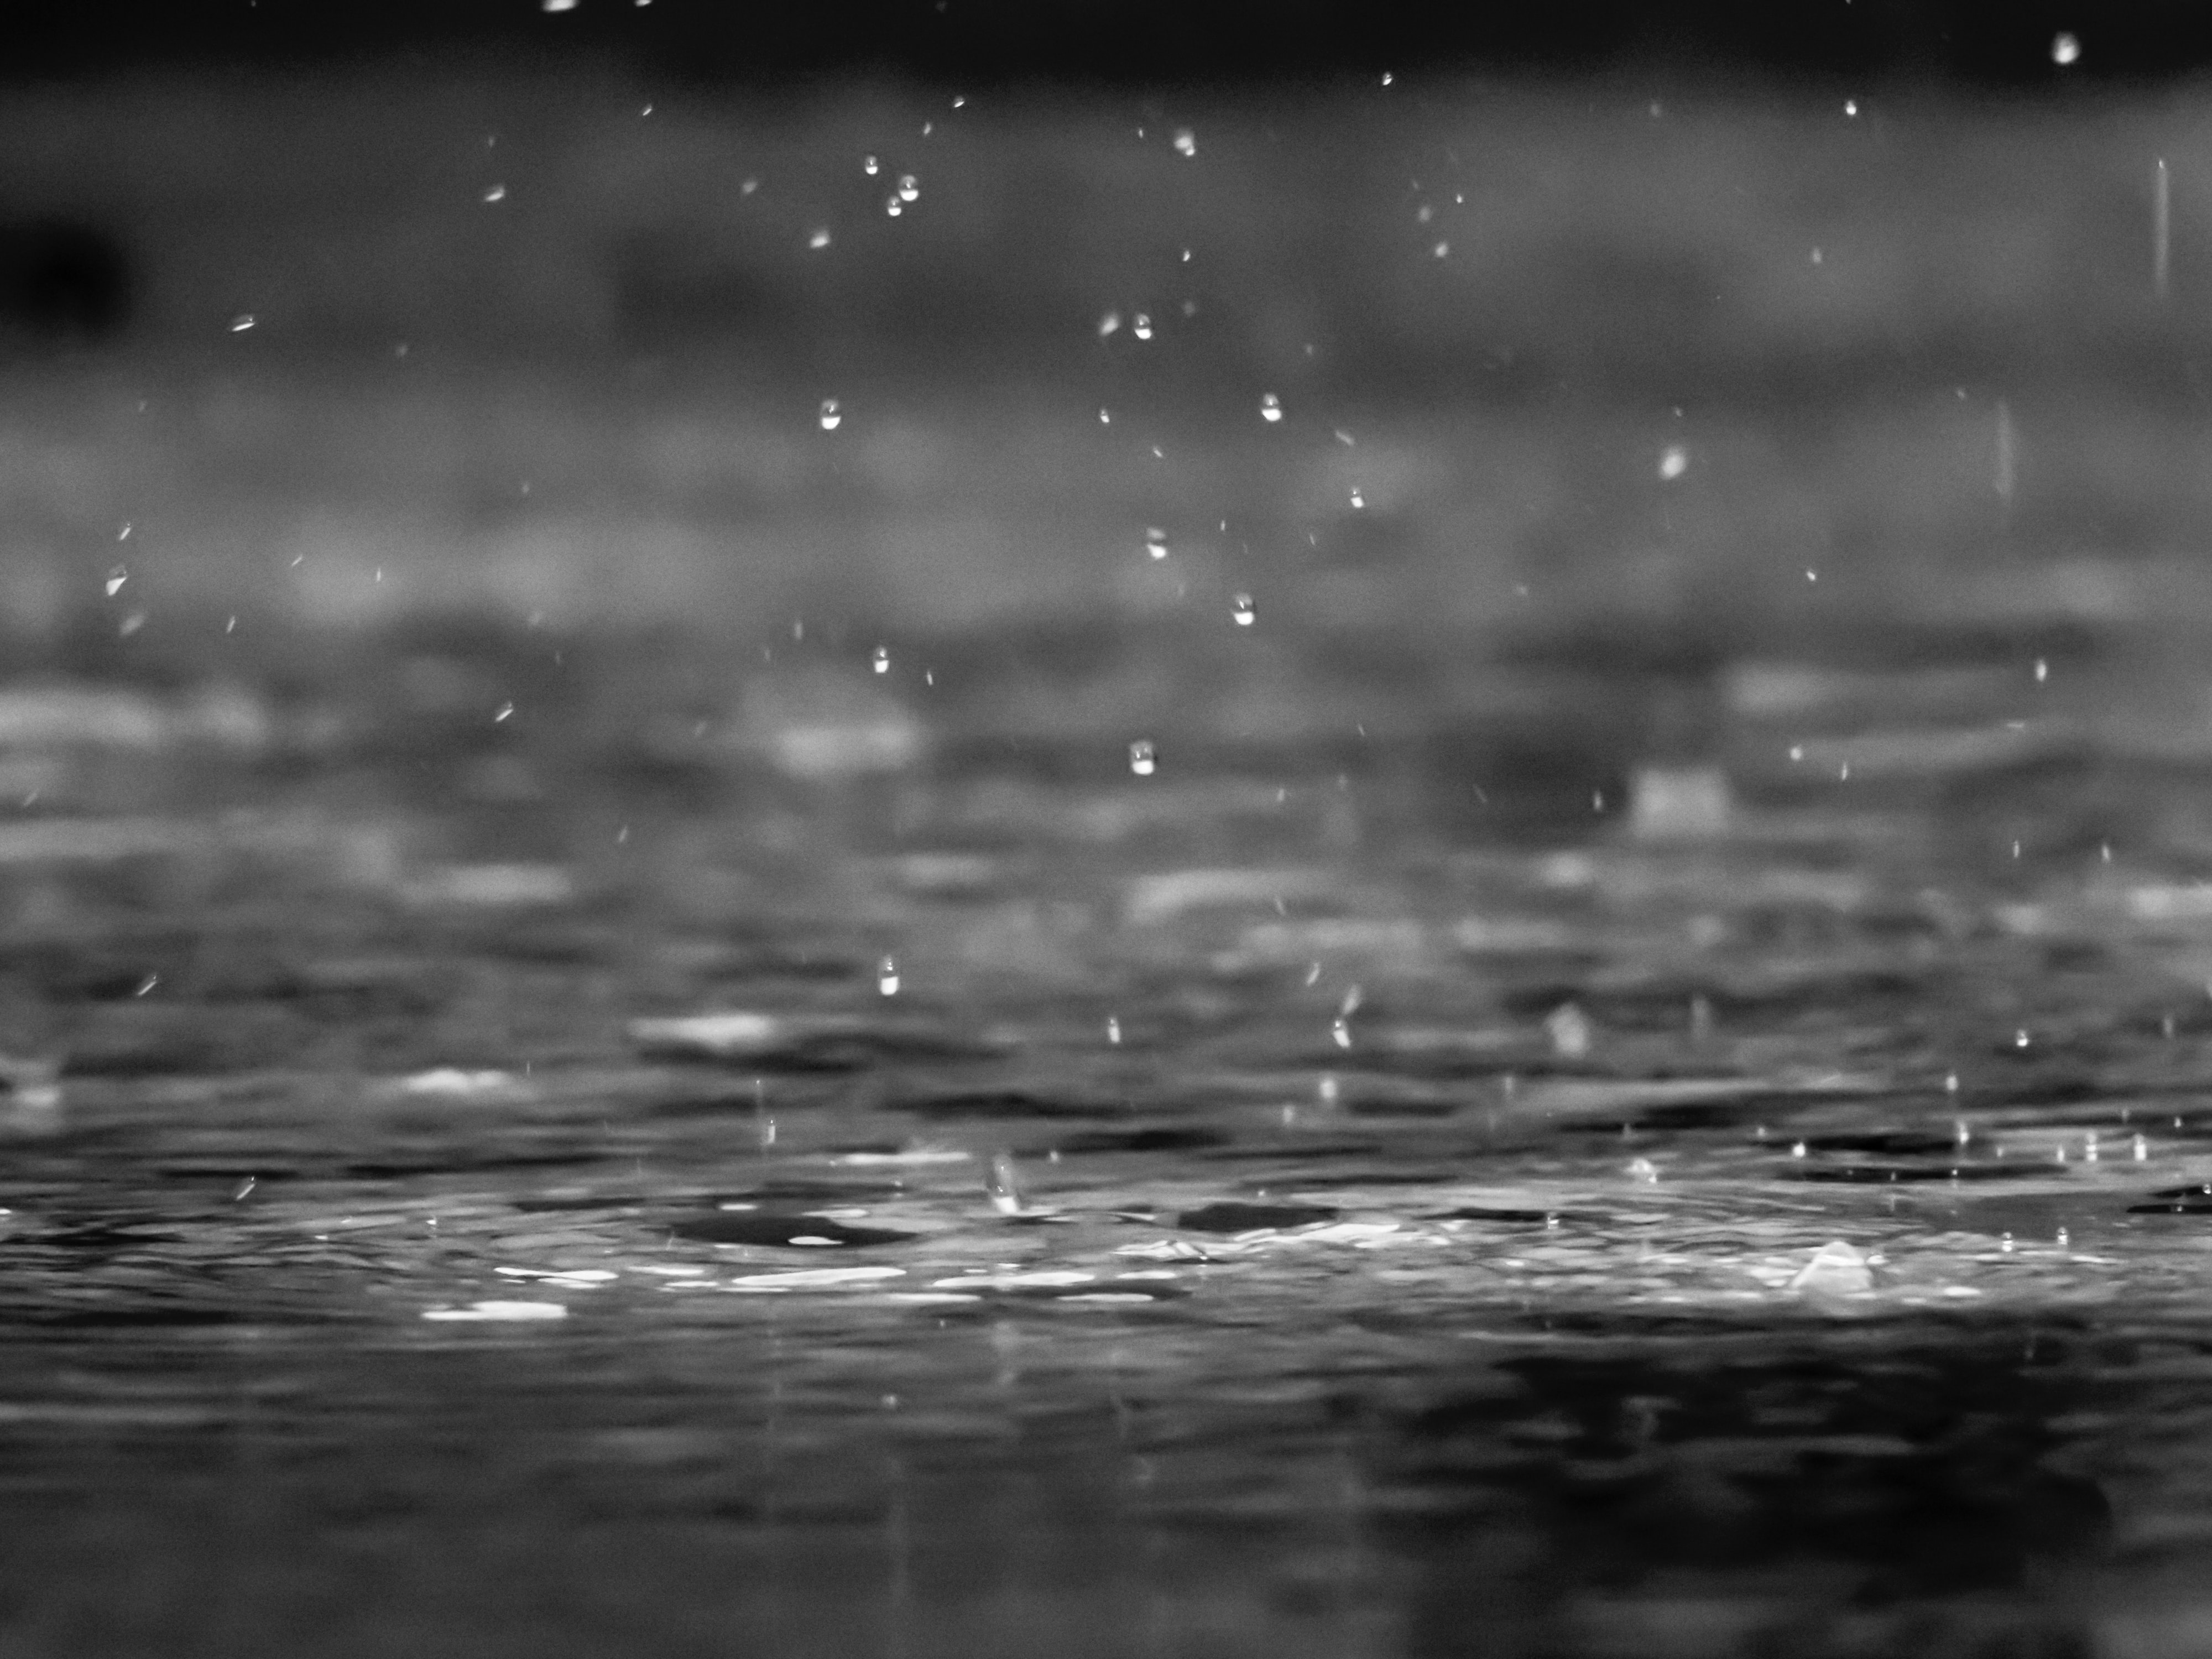 Light to moderate rainfall predicted across the country